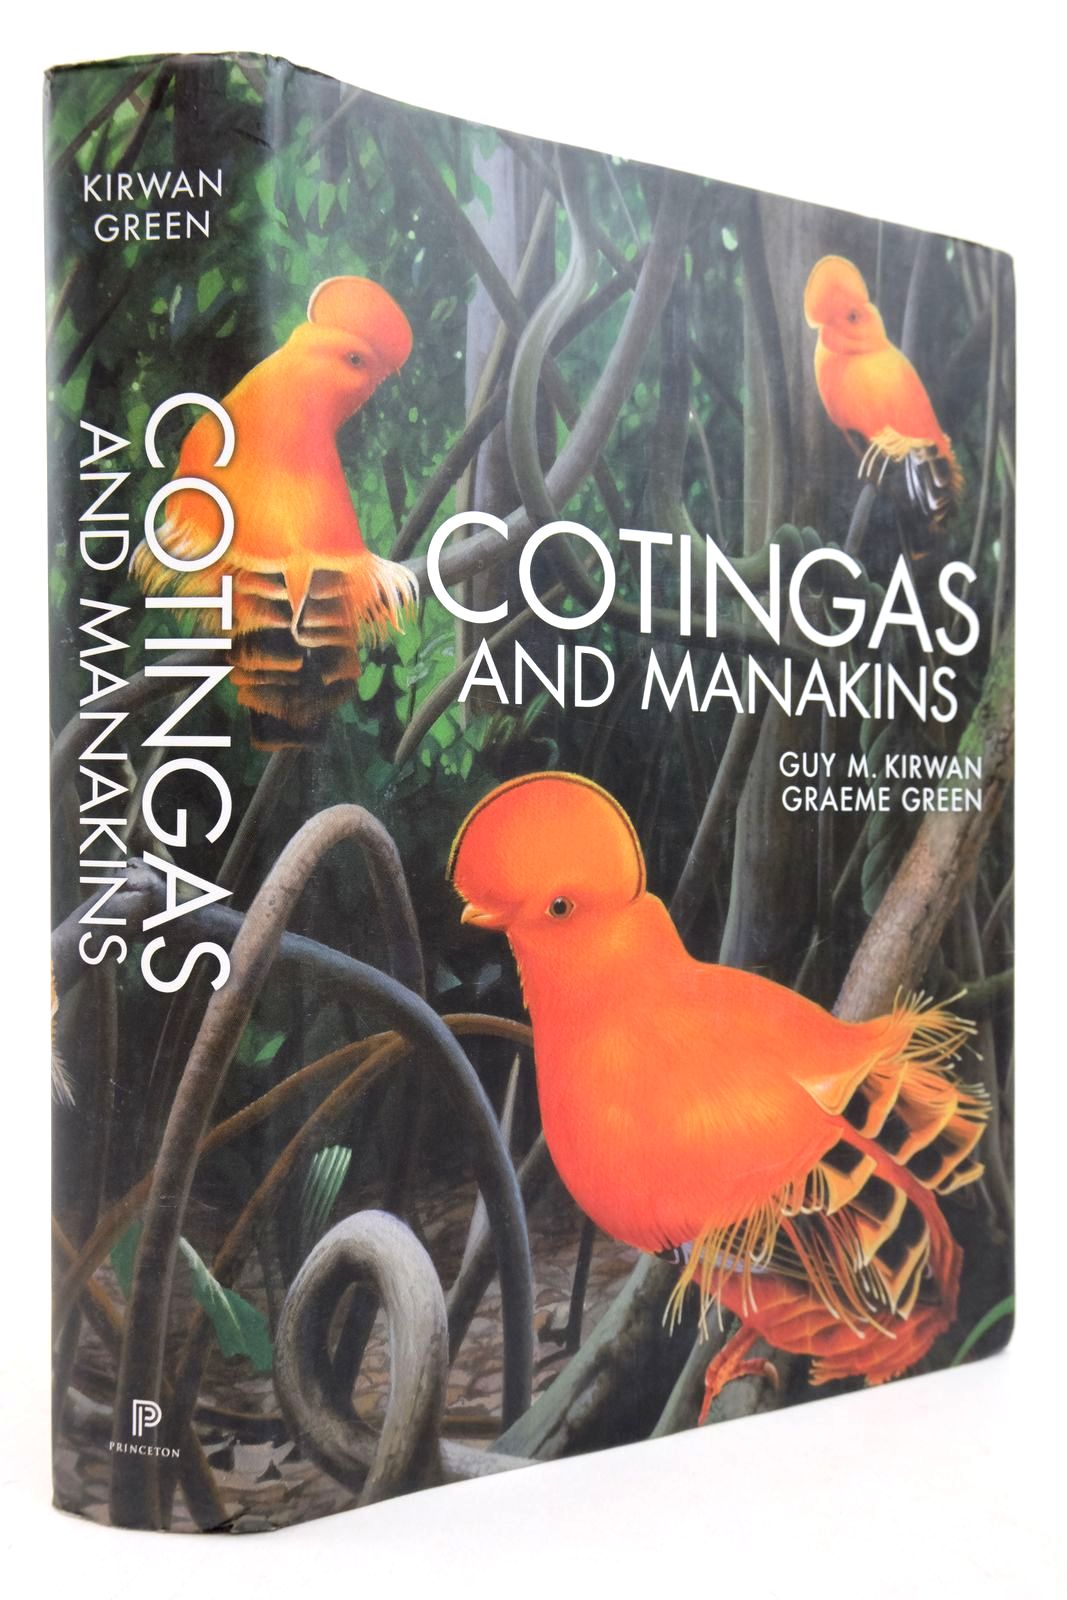 Photo of COTINGAS AND MANAKINS written by Kirwan, Guy M. Green, Graeme illustrated by Barnes, Eustace published by Princeton University Press (STOCK CODE: 2139603)  for sale by Stella & Rose's Books